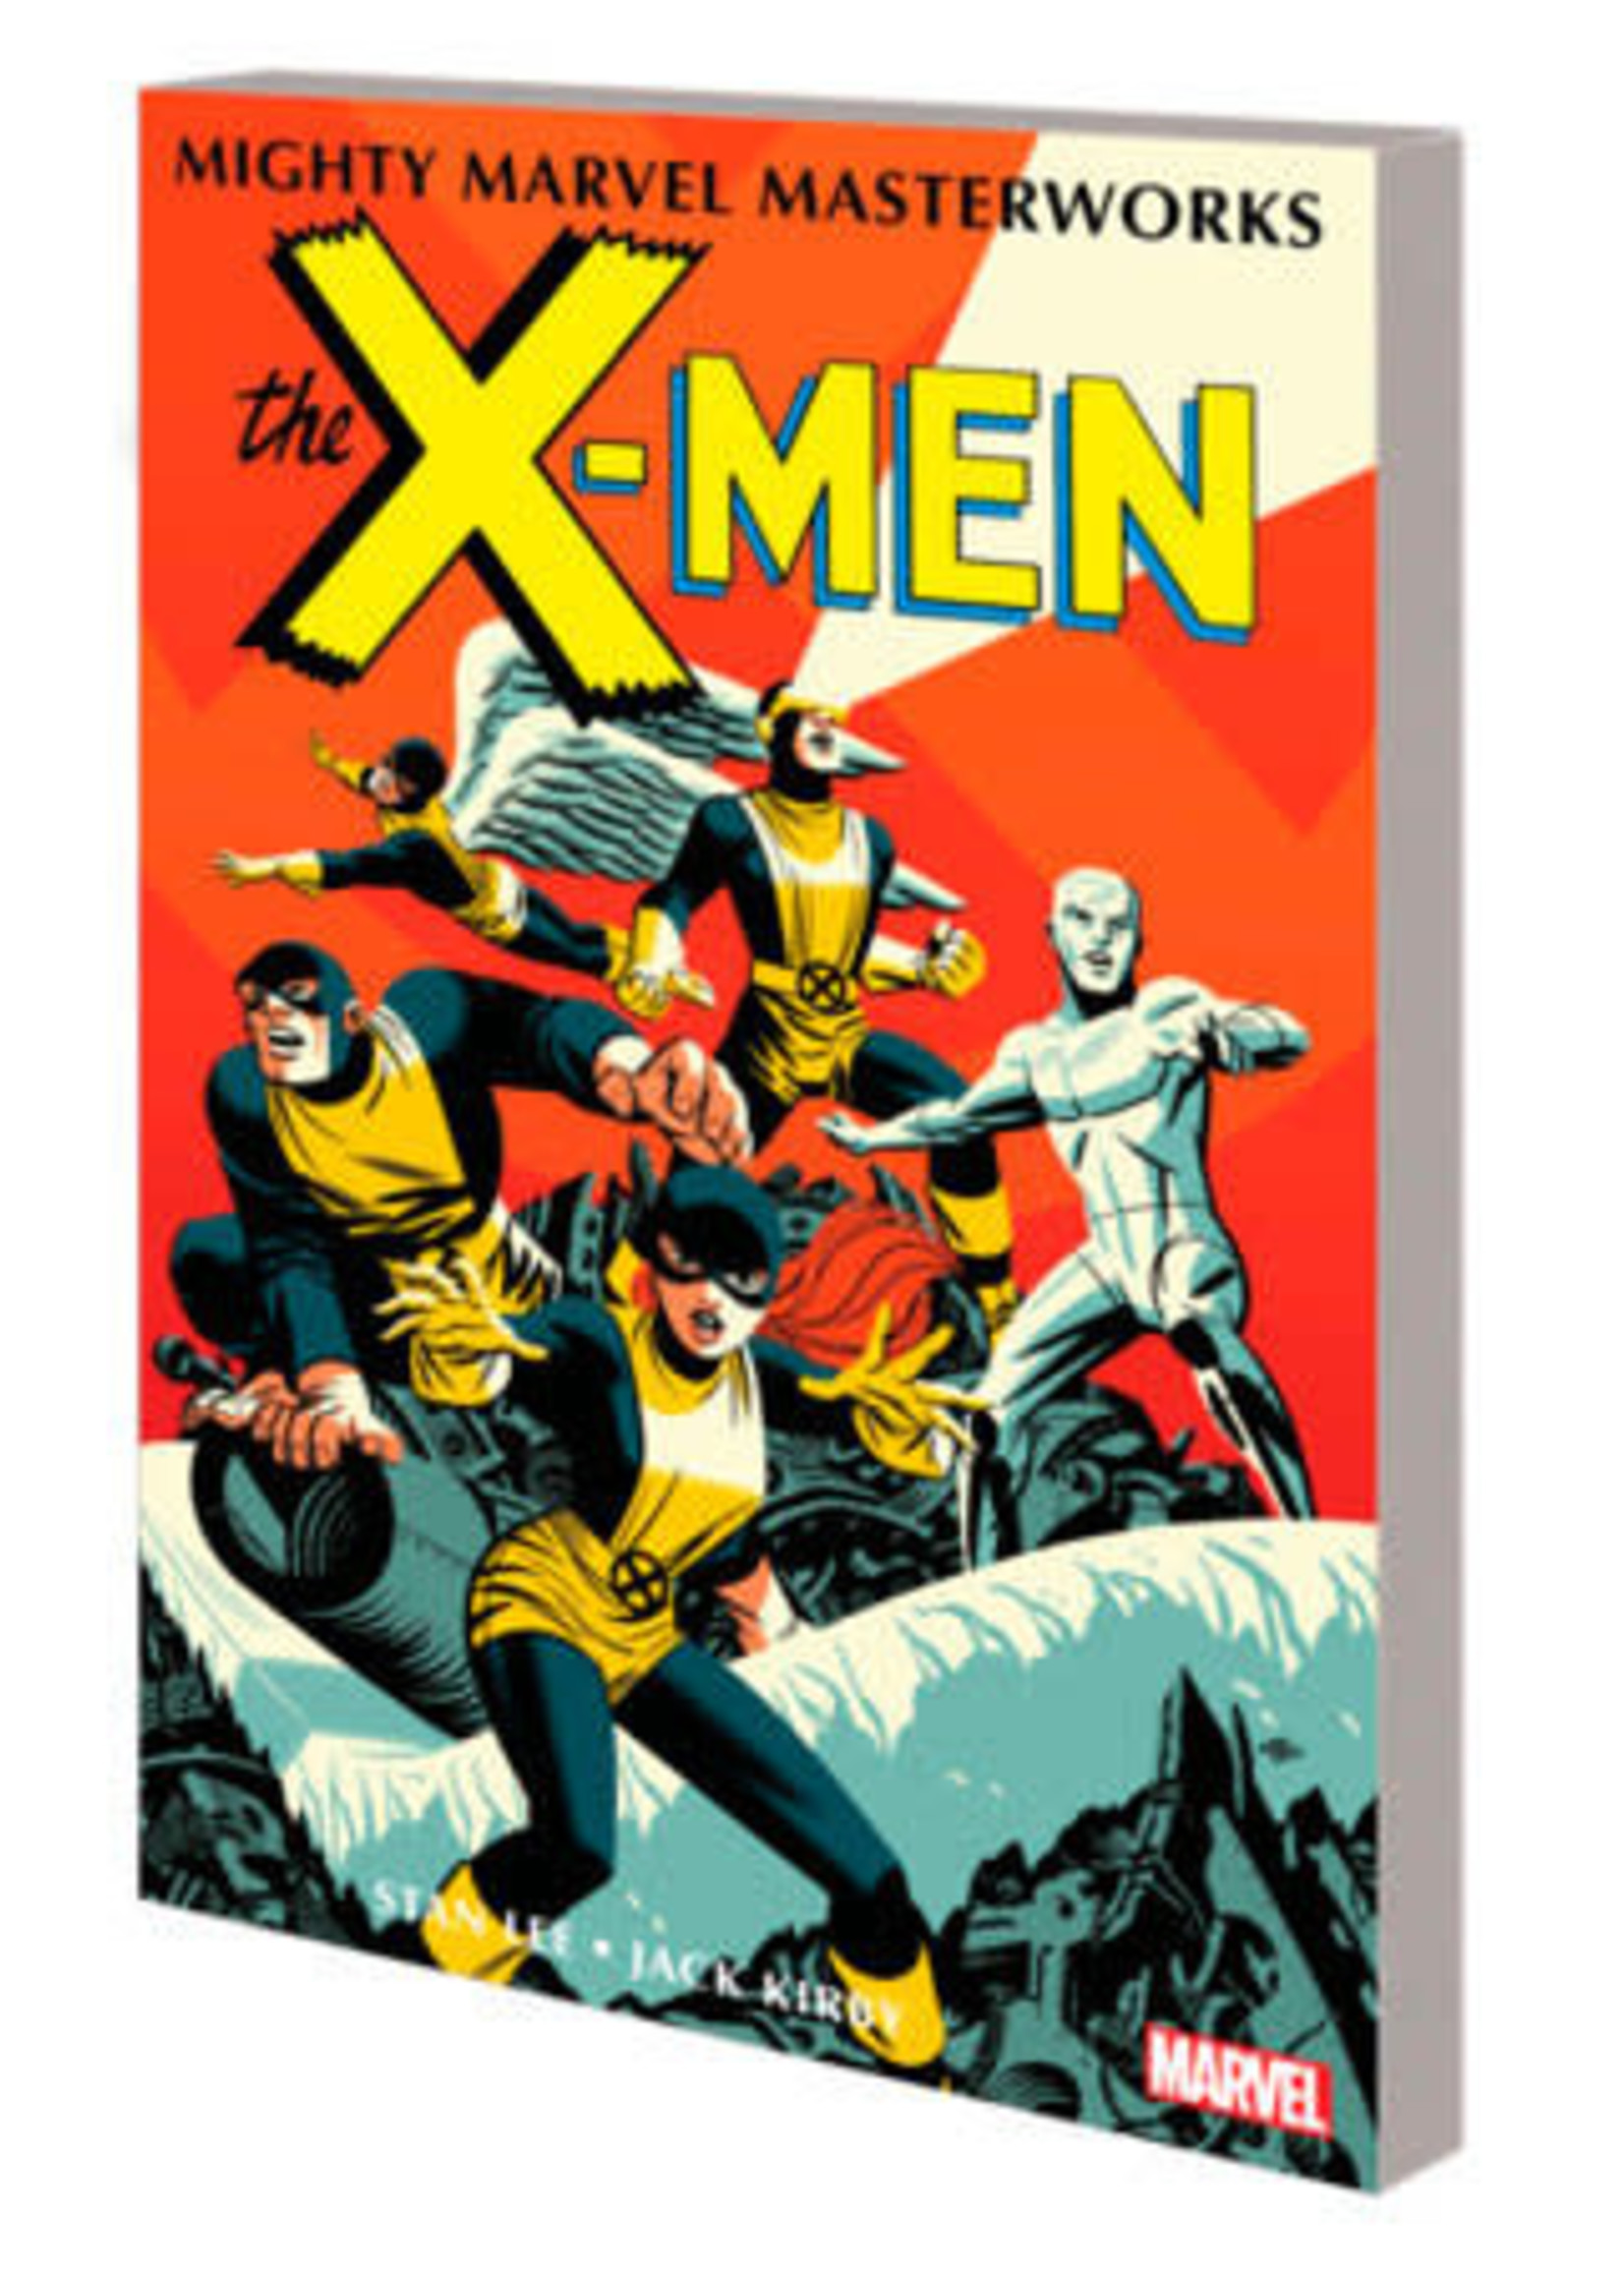 X-Men Mighty Marvel Masterworks: The X-Men Vol. 1  - The Strangest Super Heroes of All | Michael Cho Cover